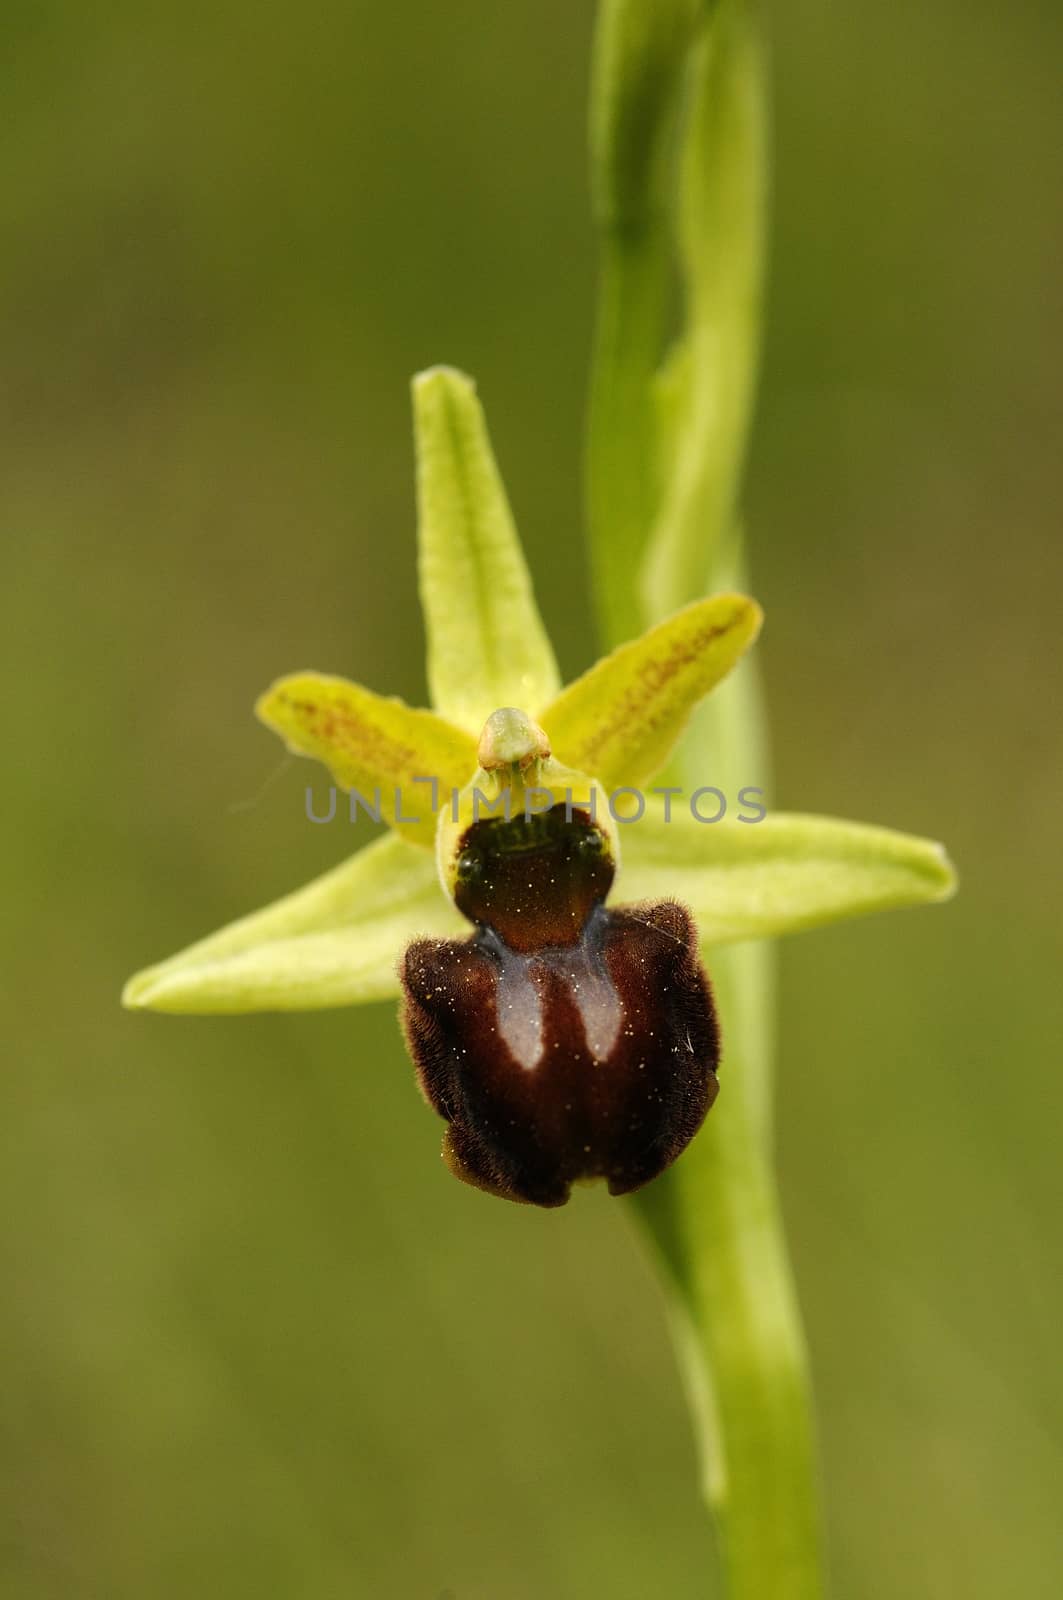 Early Spider Orchid - Ophrys sphegodes, detail of flowers by jalonsohu@gmail.com